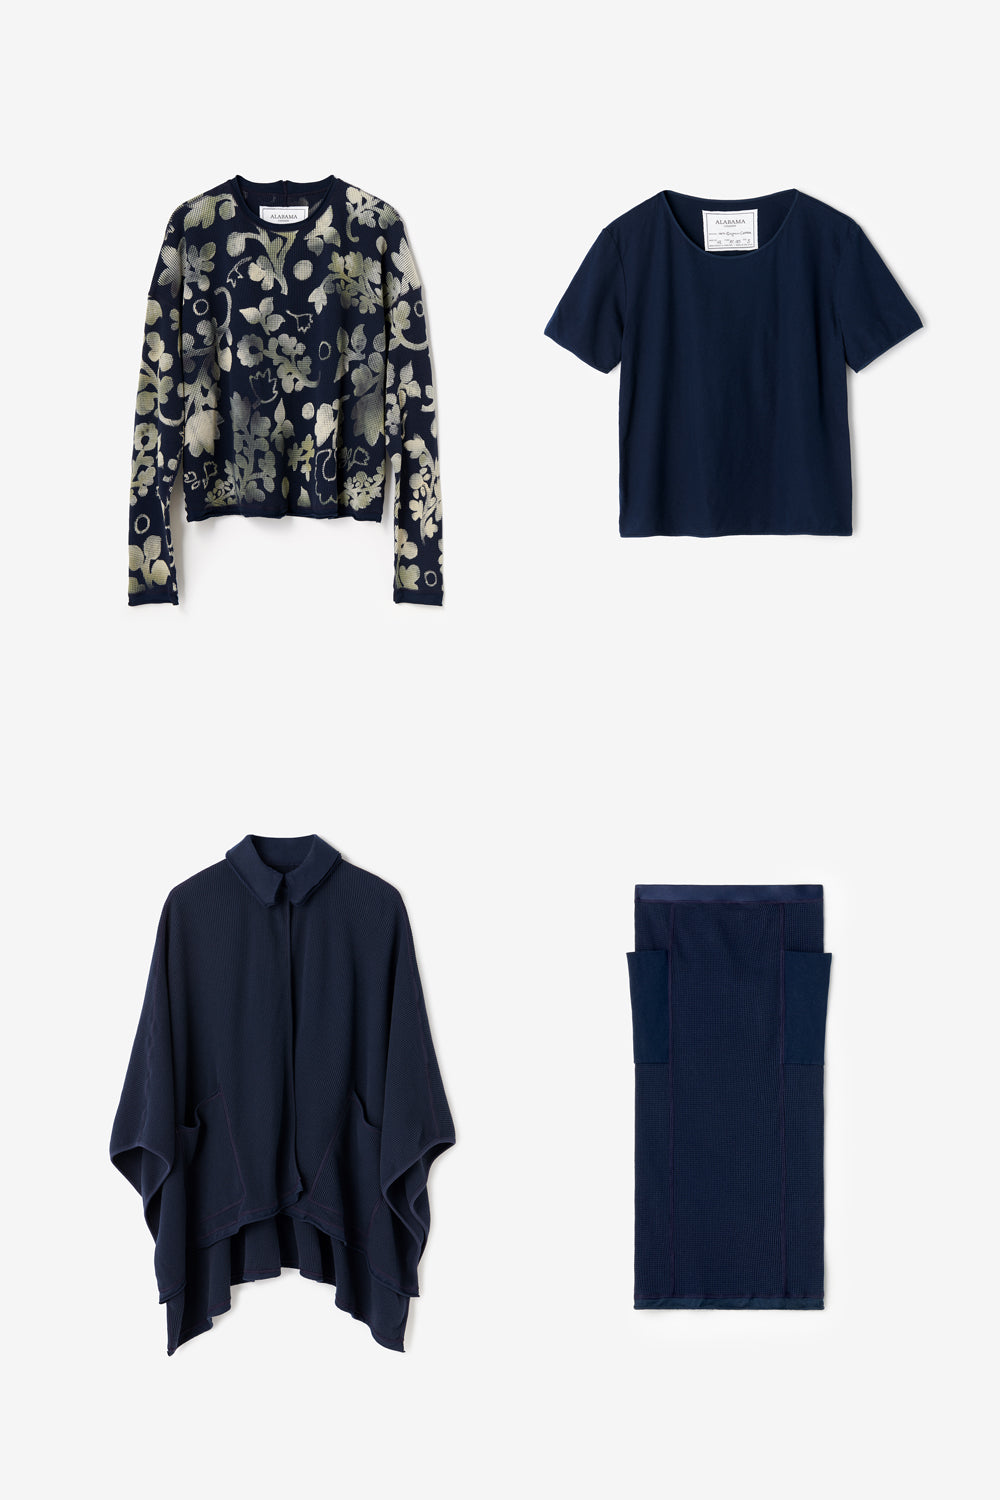 The Viola Tee, Merritt Top, Chelsea Skirt, and Emerson Wrap, all shown in Navy.